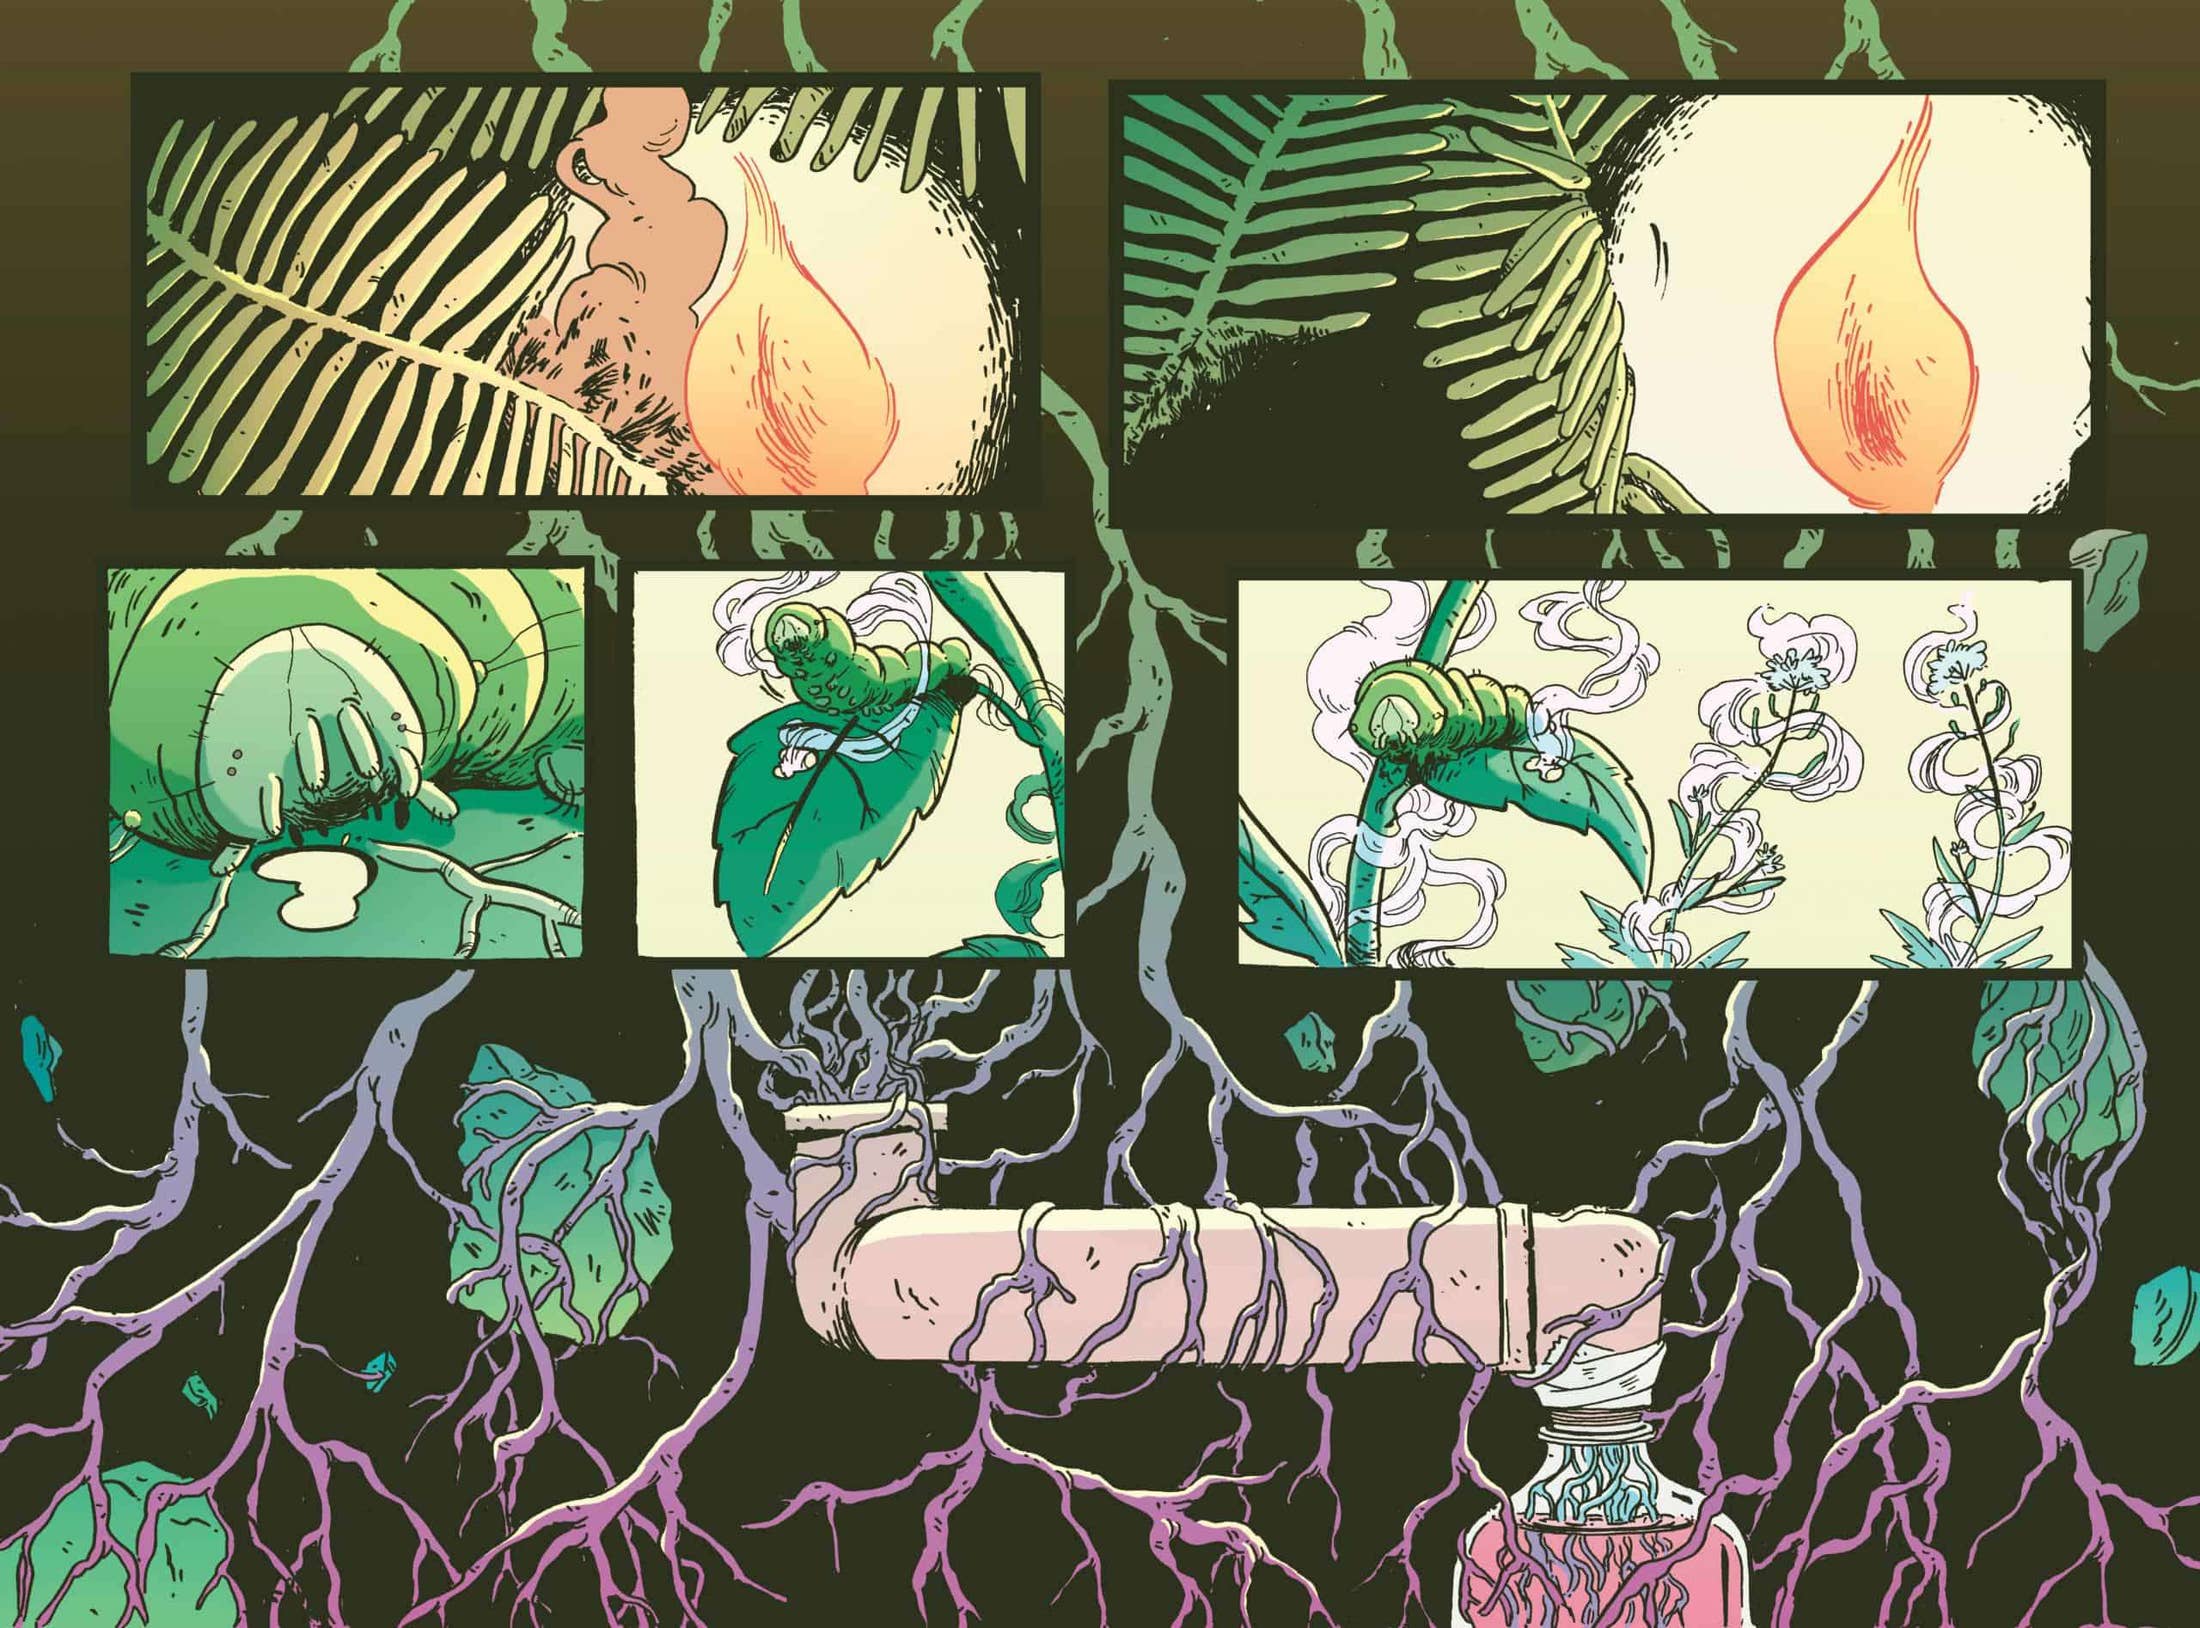 Swamp Thing: Twin Branches uses monsters as a metaphor for finding yourself...